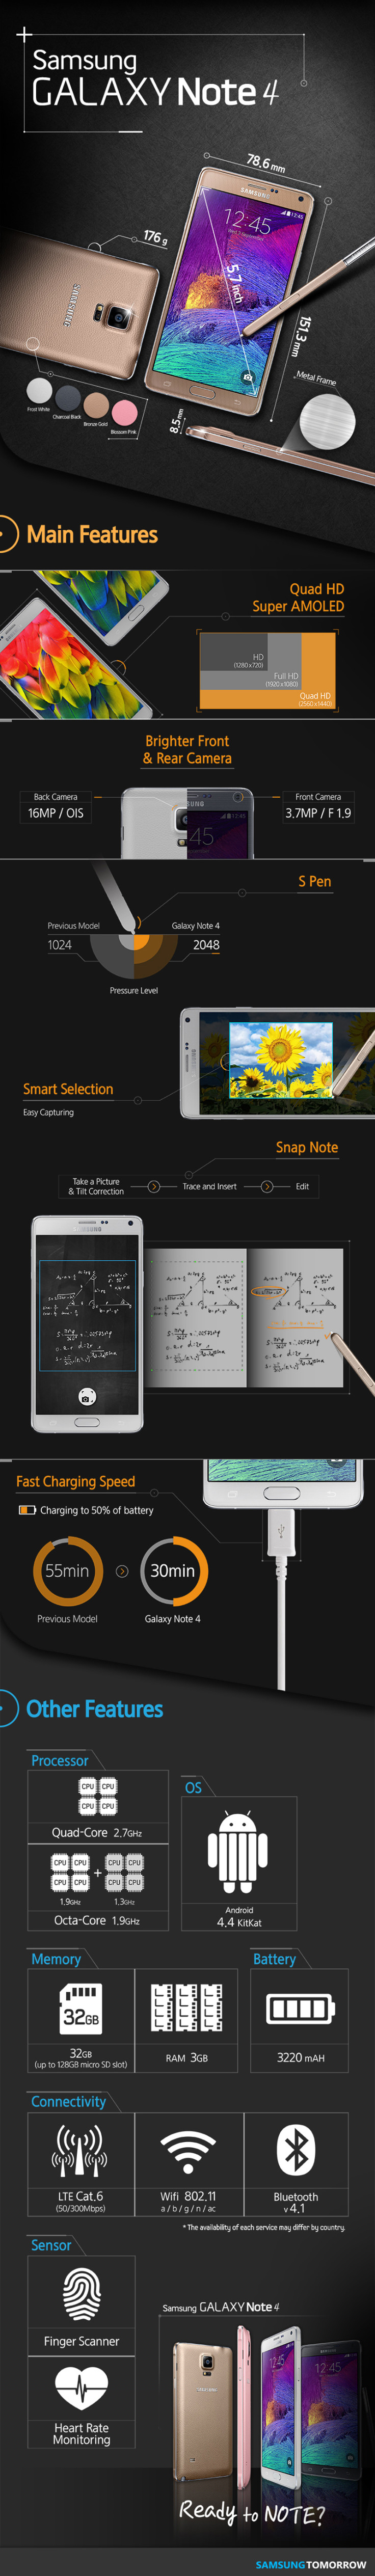 Samsung Note 4 features